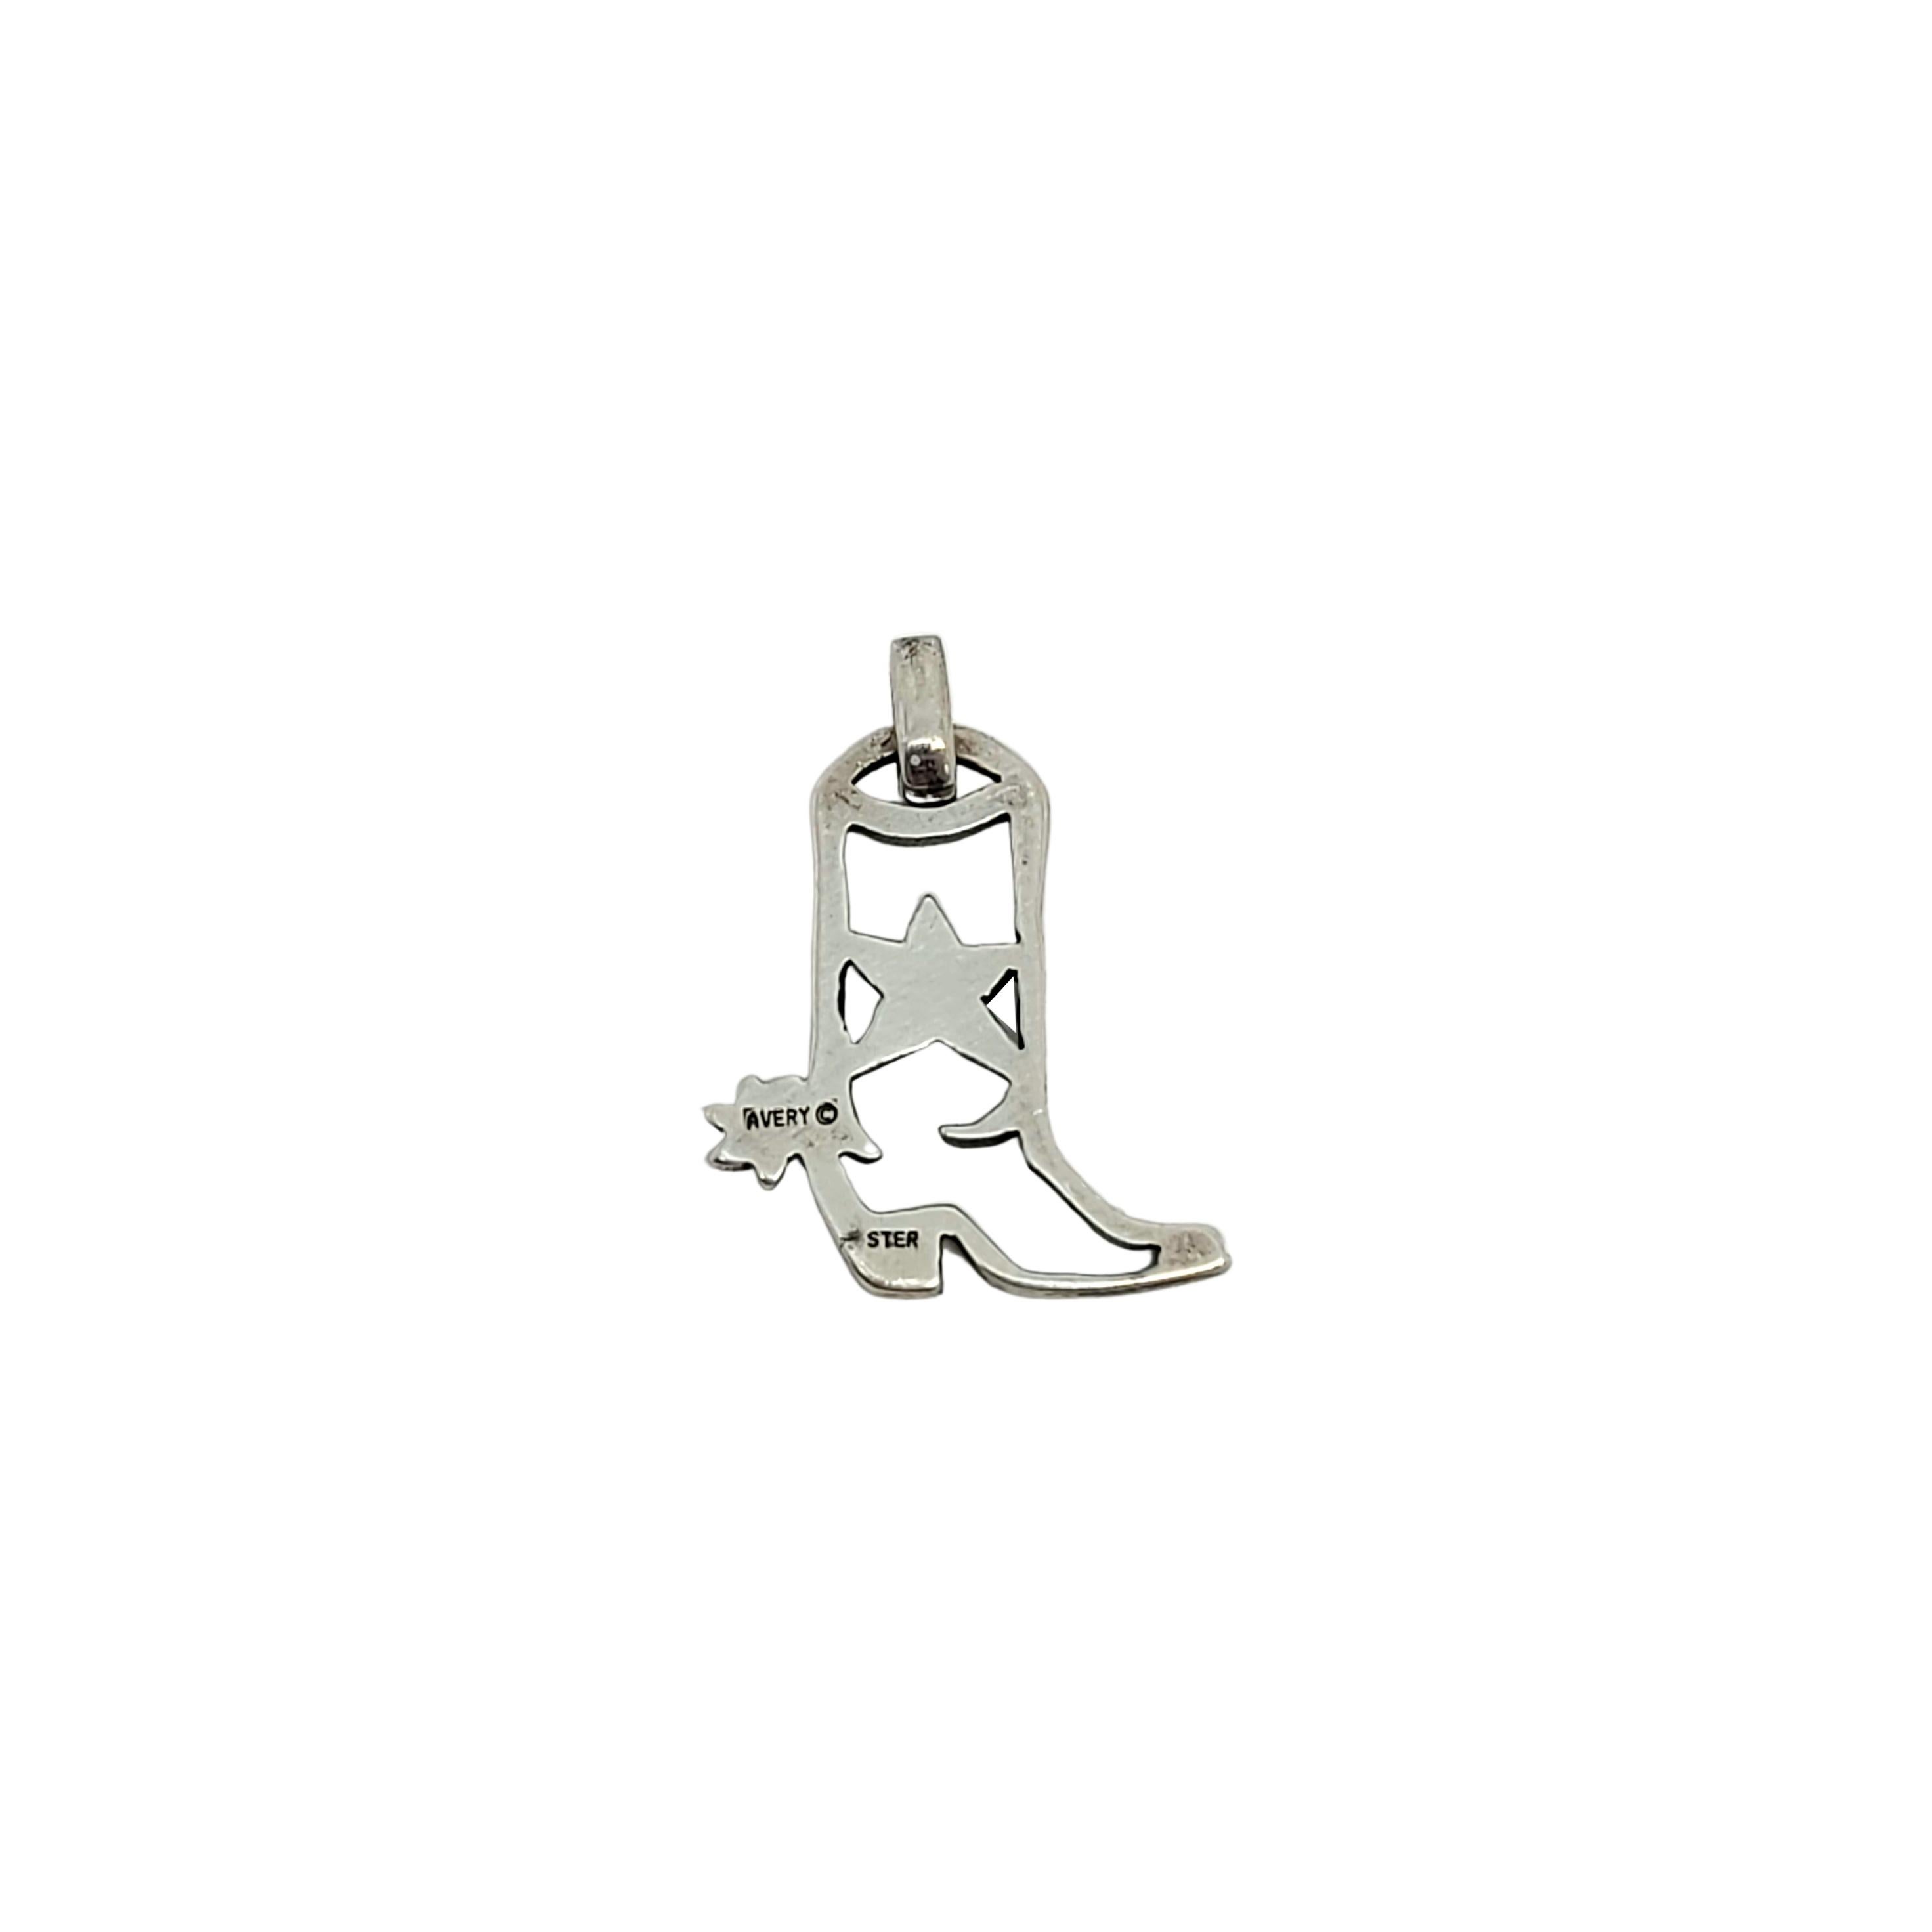 James Avery sterling silver cowboy boot charm/pendant.

Beautiful cowboy boot with openwork star design charm in sterling silver.

Measures approx 3/4